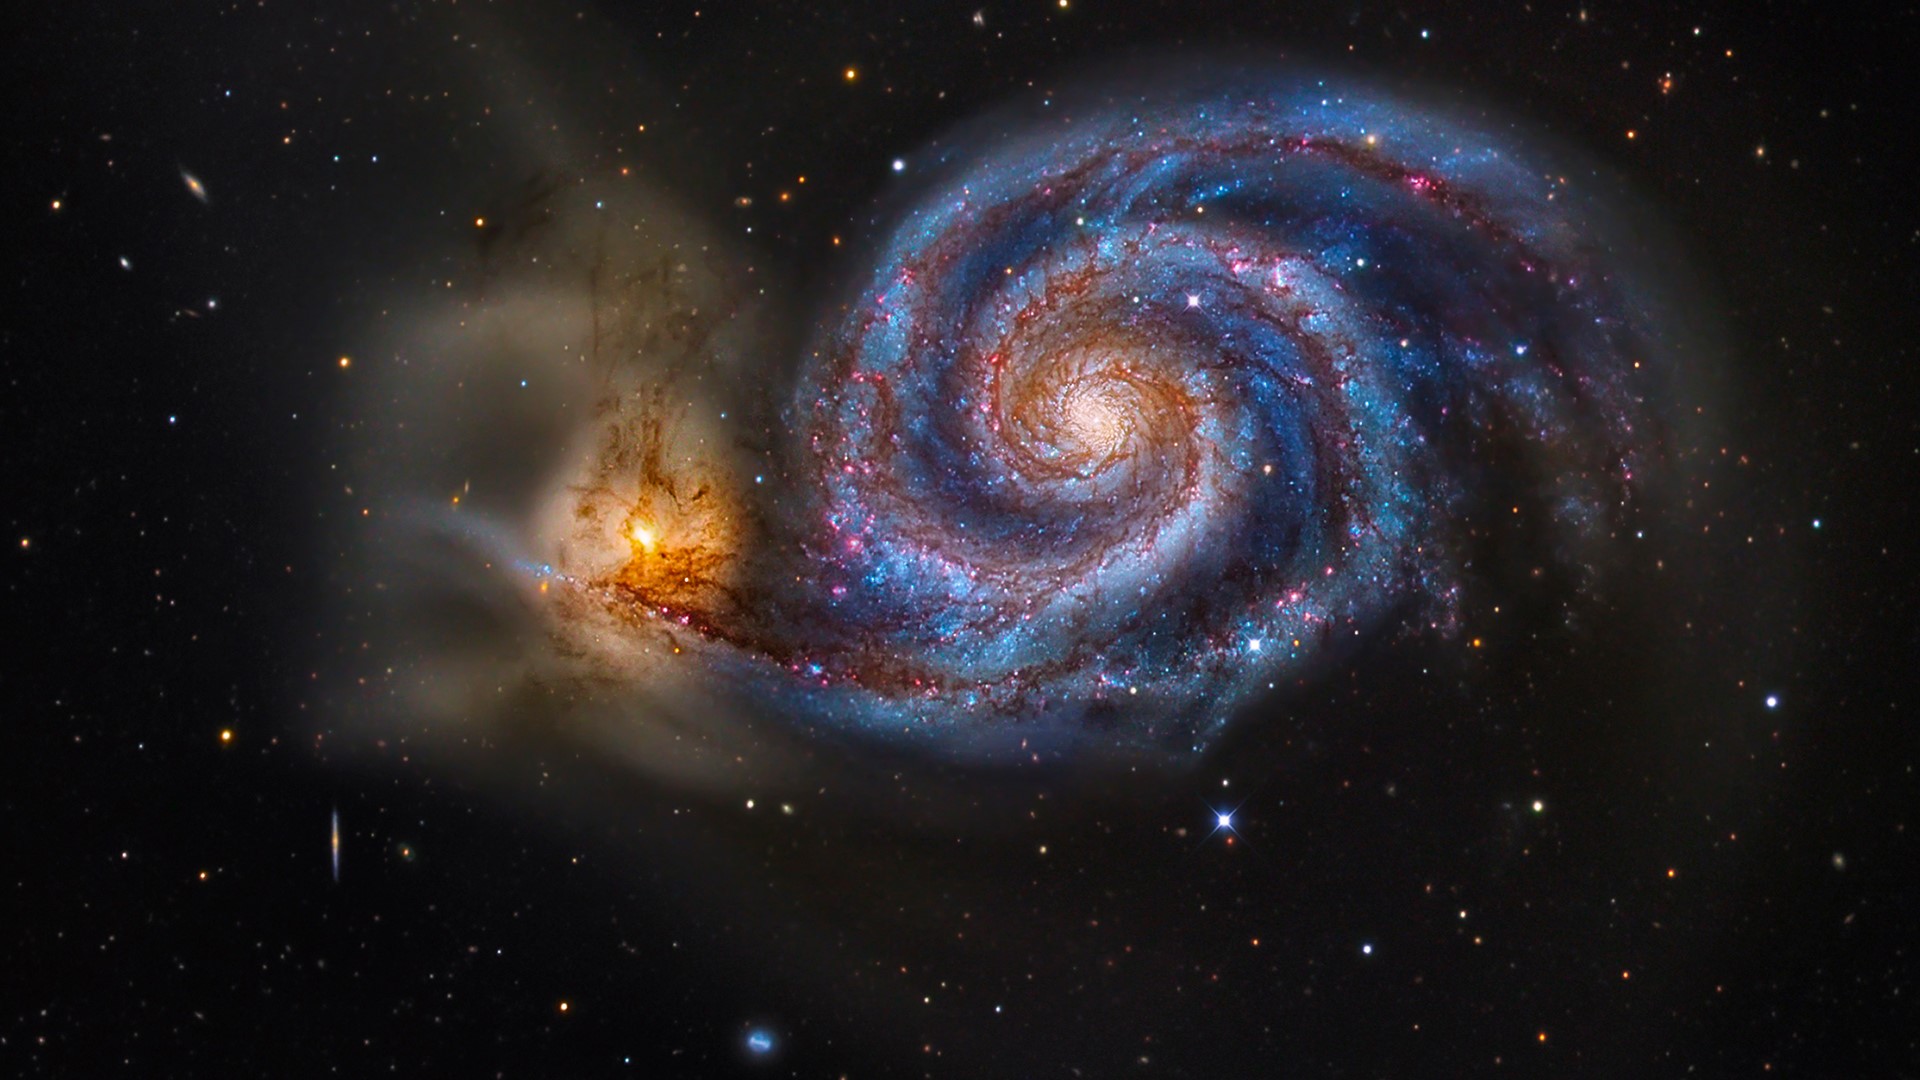 The Whirlpool Galaxy M51 - pair of galaxies locked in a gravitational ...